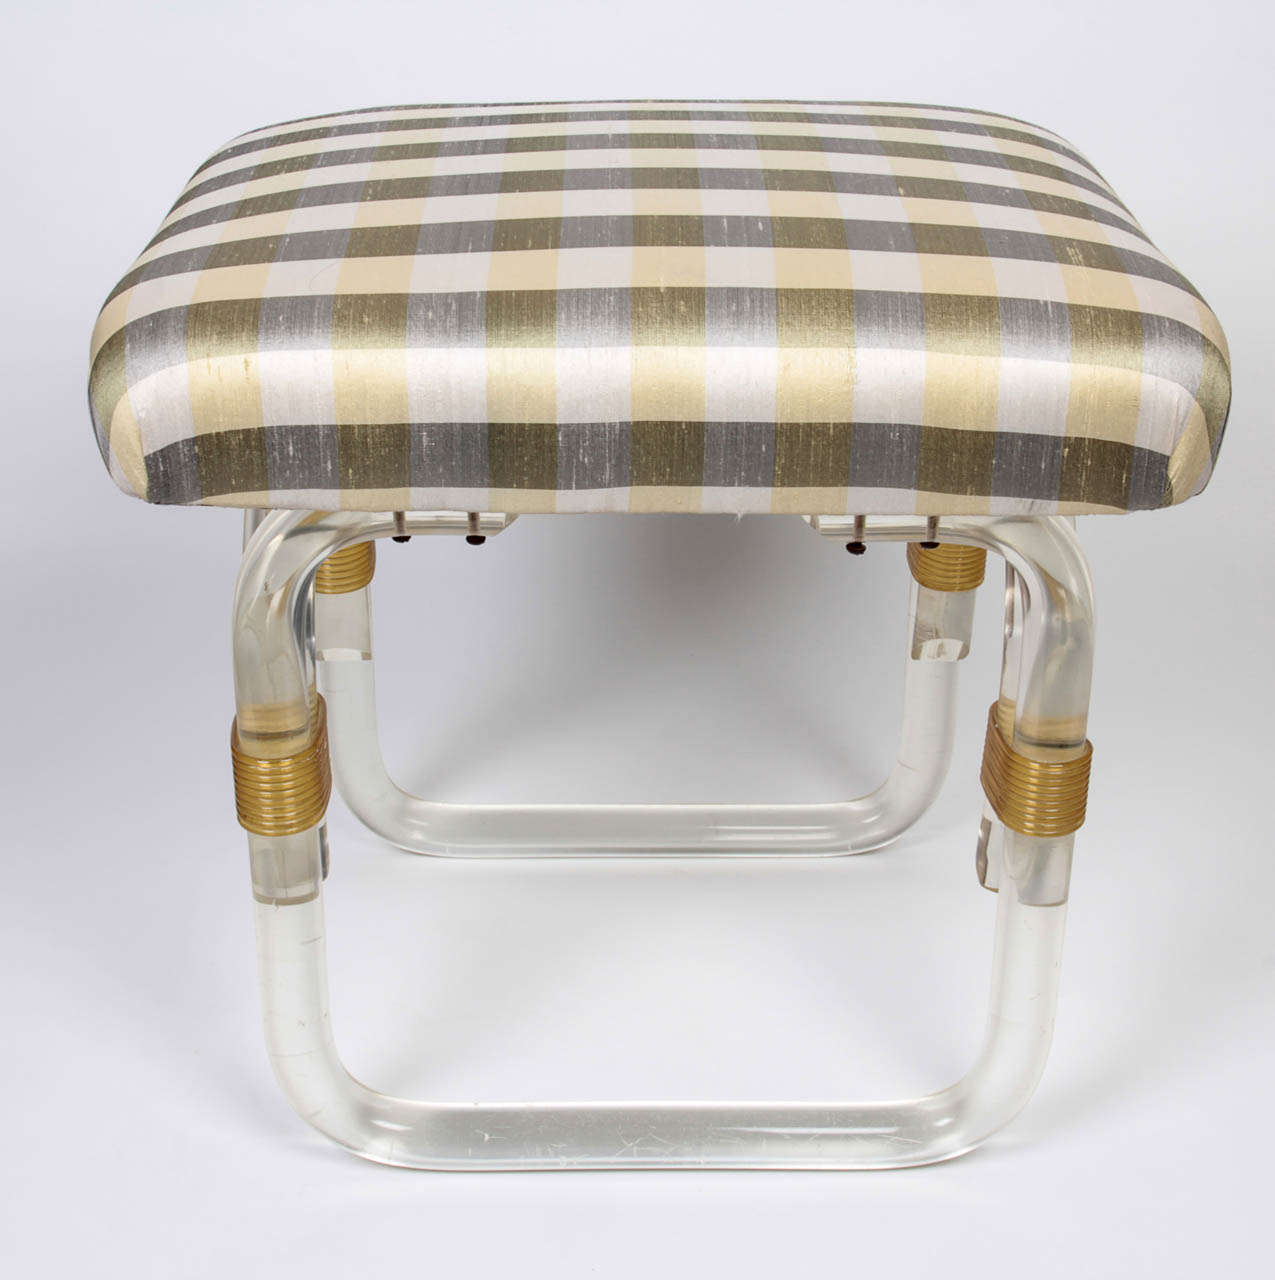 Grosfeld House New York lucite stool circa 1940.  Cylindrical lucite base stool with gold lucite wrap like connecting elements, silk upholstery.

H: 16 1/4